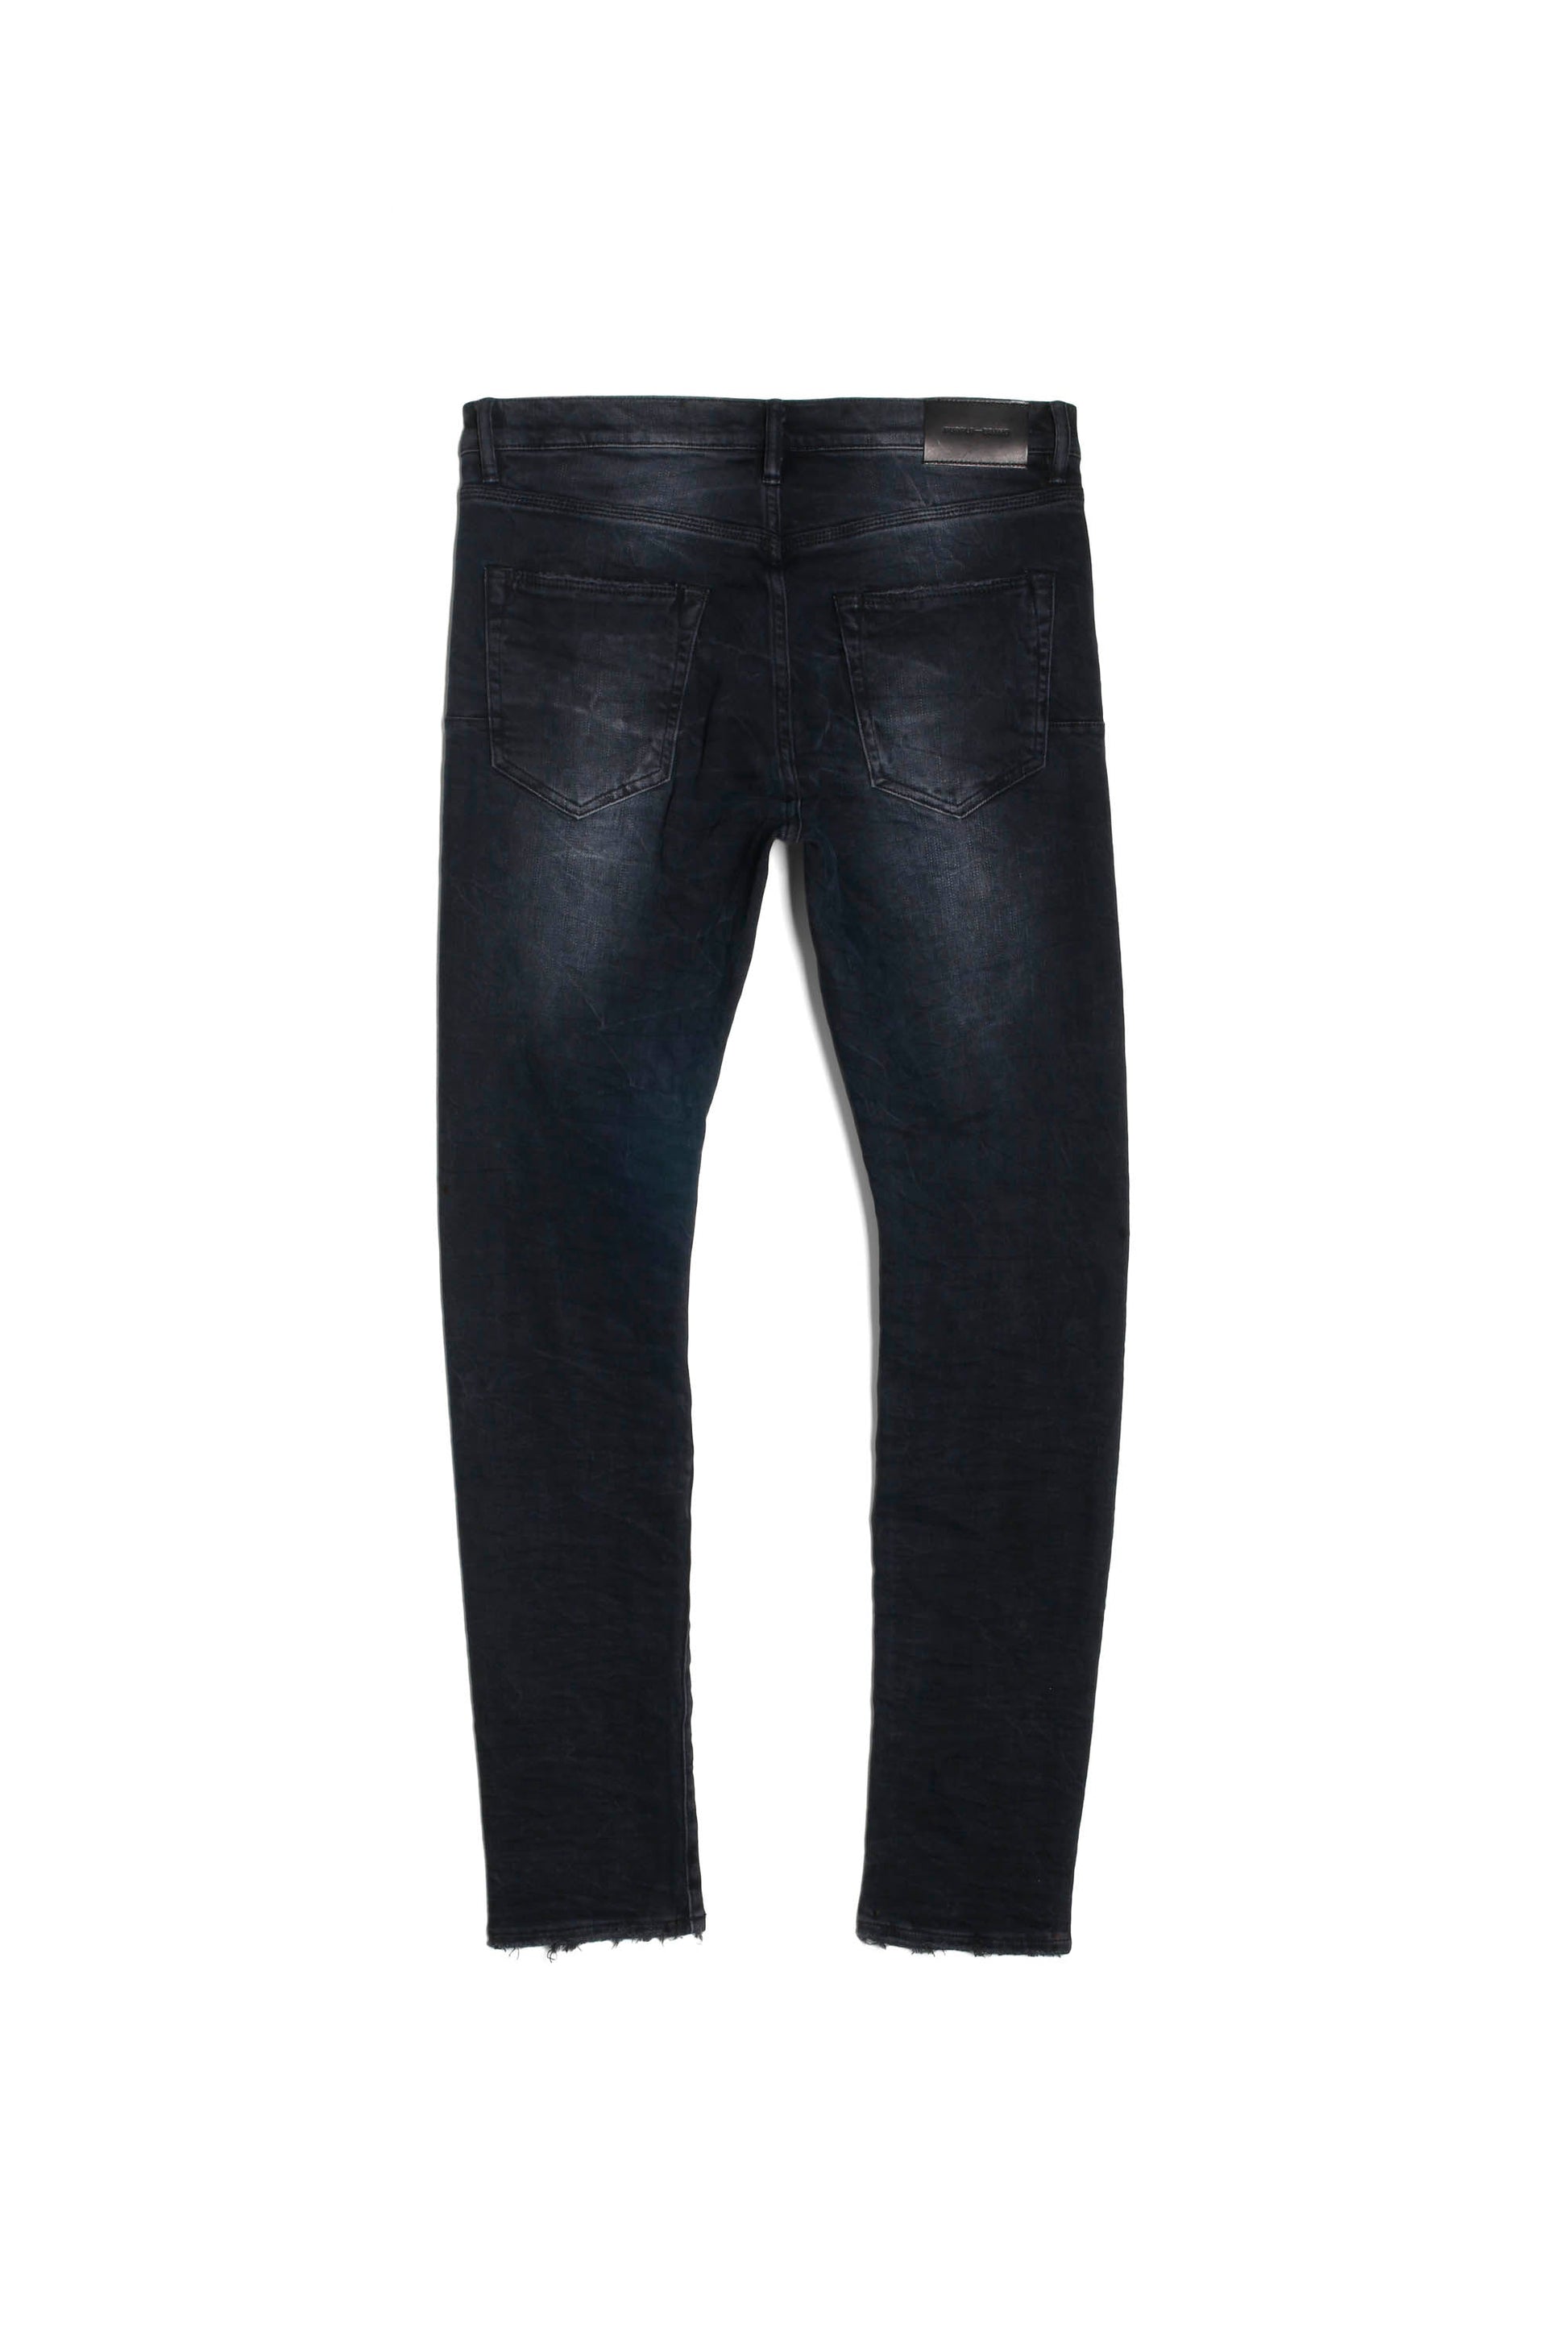 Purple Brand Outlet: jeans for man - Black  Purple Brand jeans P001TDIP  online at